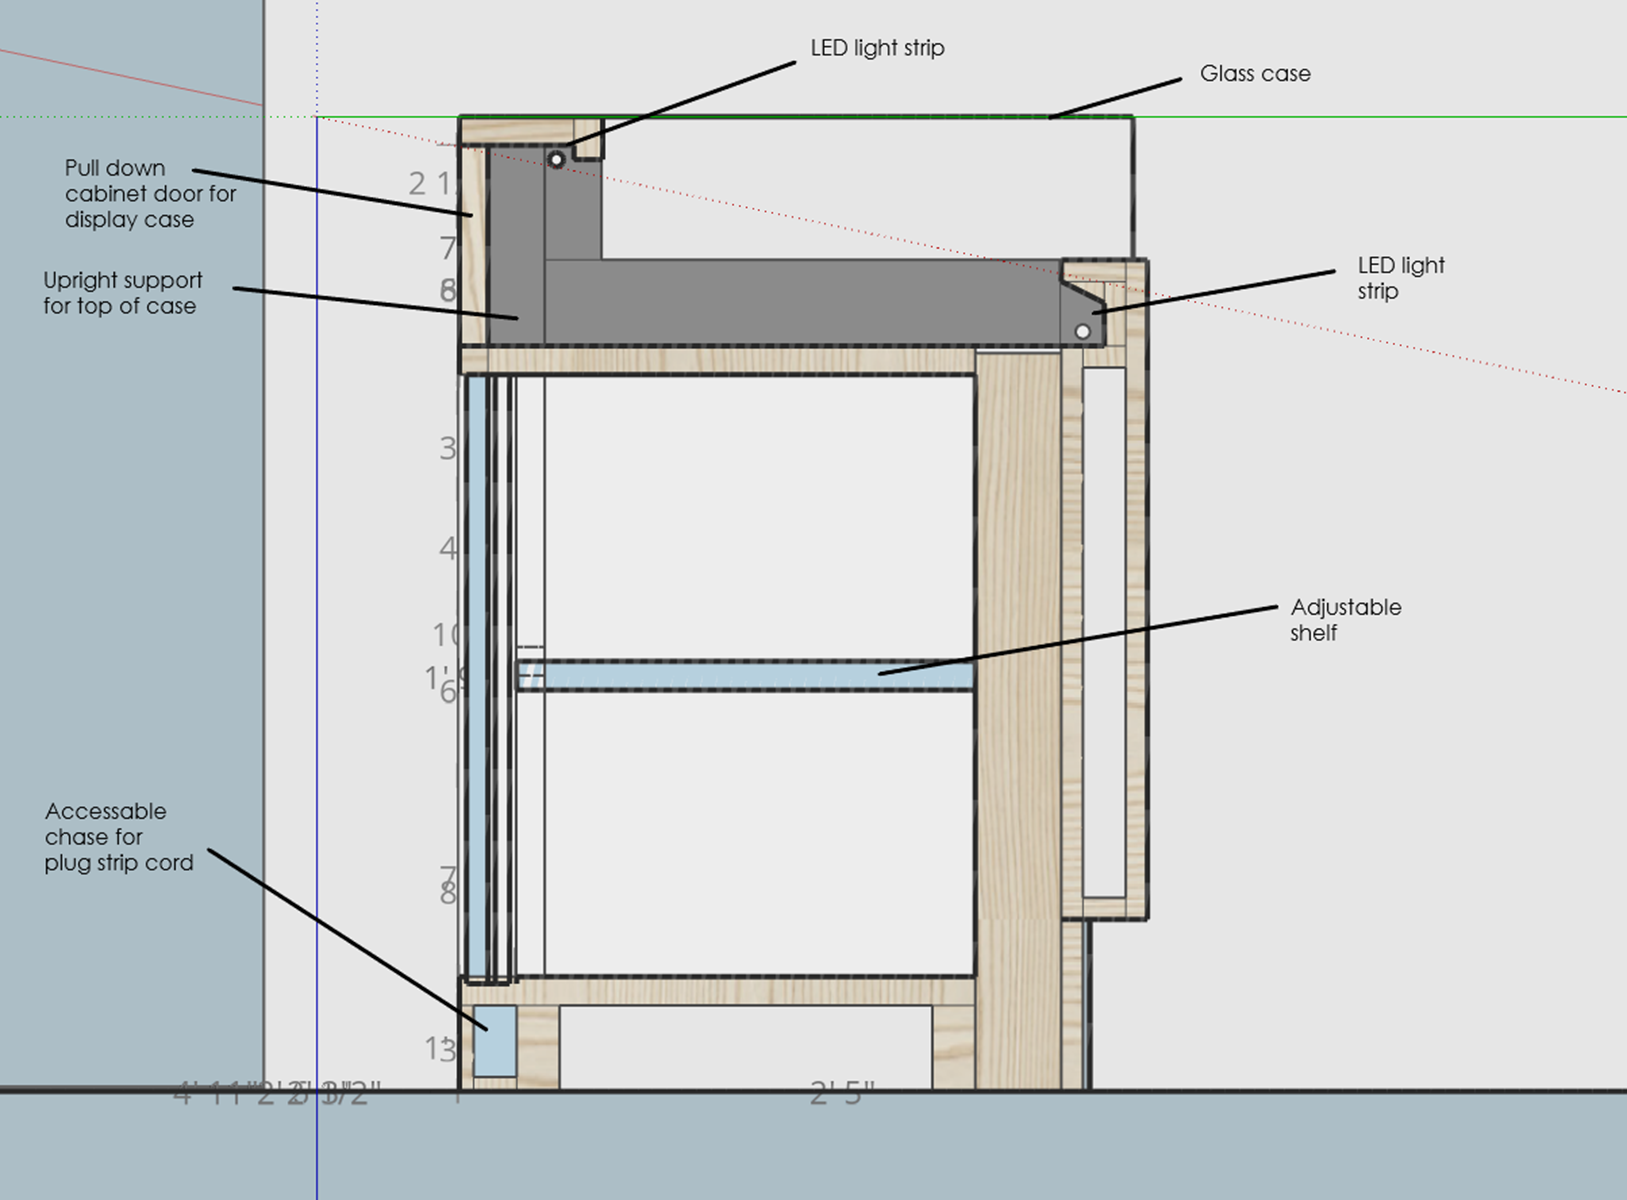 Sketchup model with dimensions